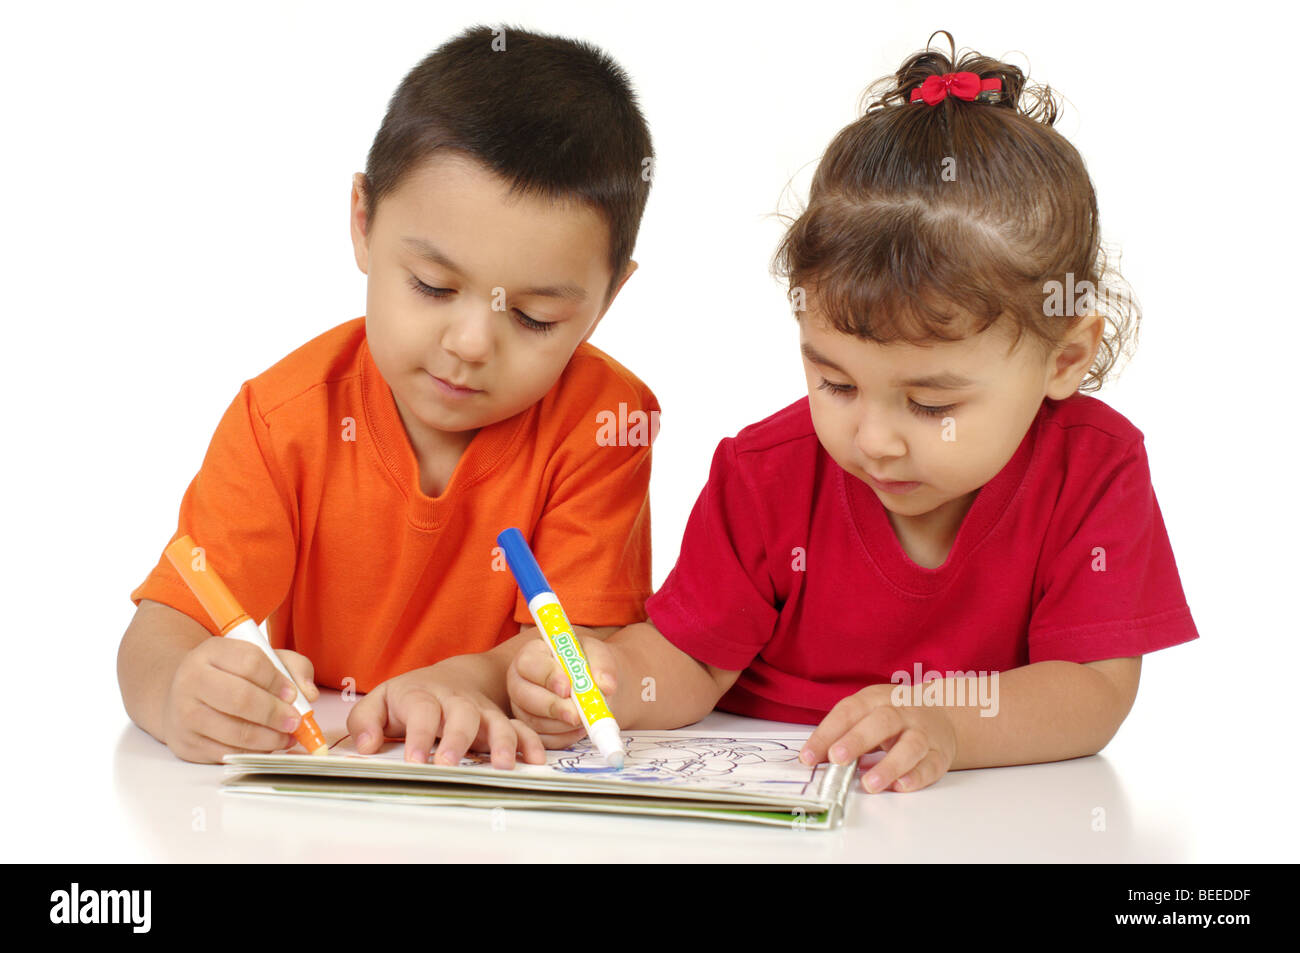 A little boy and girl coloring with markers, one labeled Crayola Stock Photo